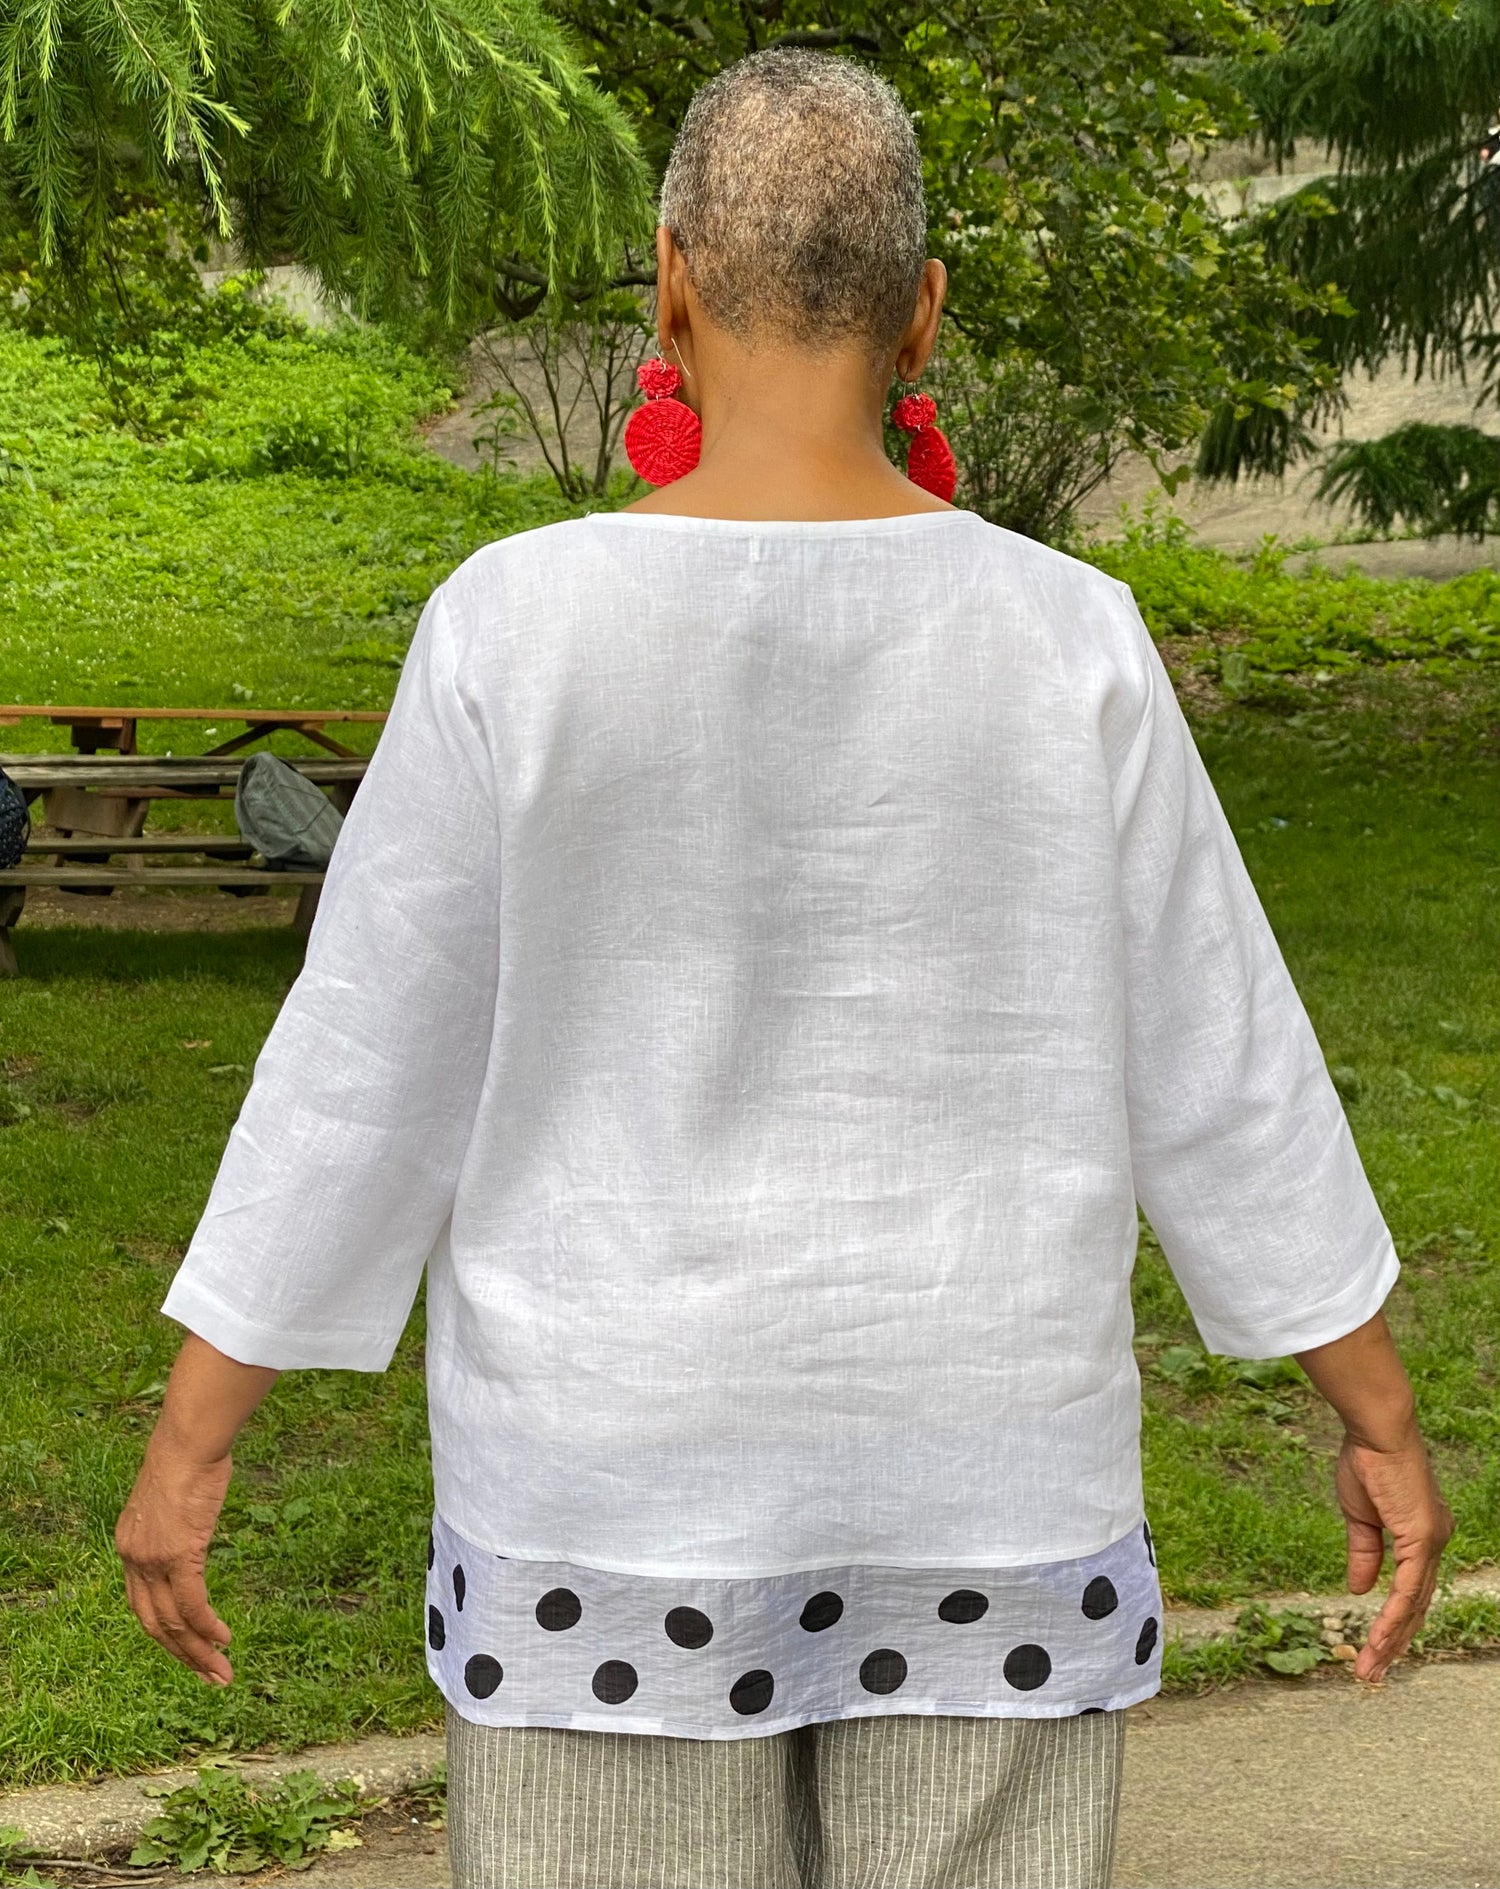 Woman with short cropped grey hair wearing a white linen top with a polka dot hem. She is showign the back view. She is wearing red woven earrings.